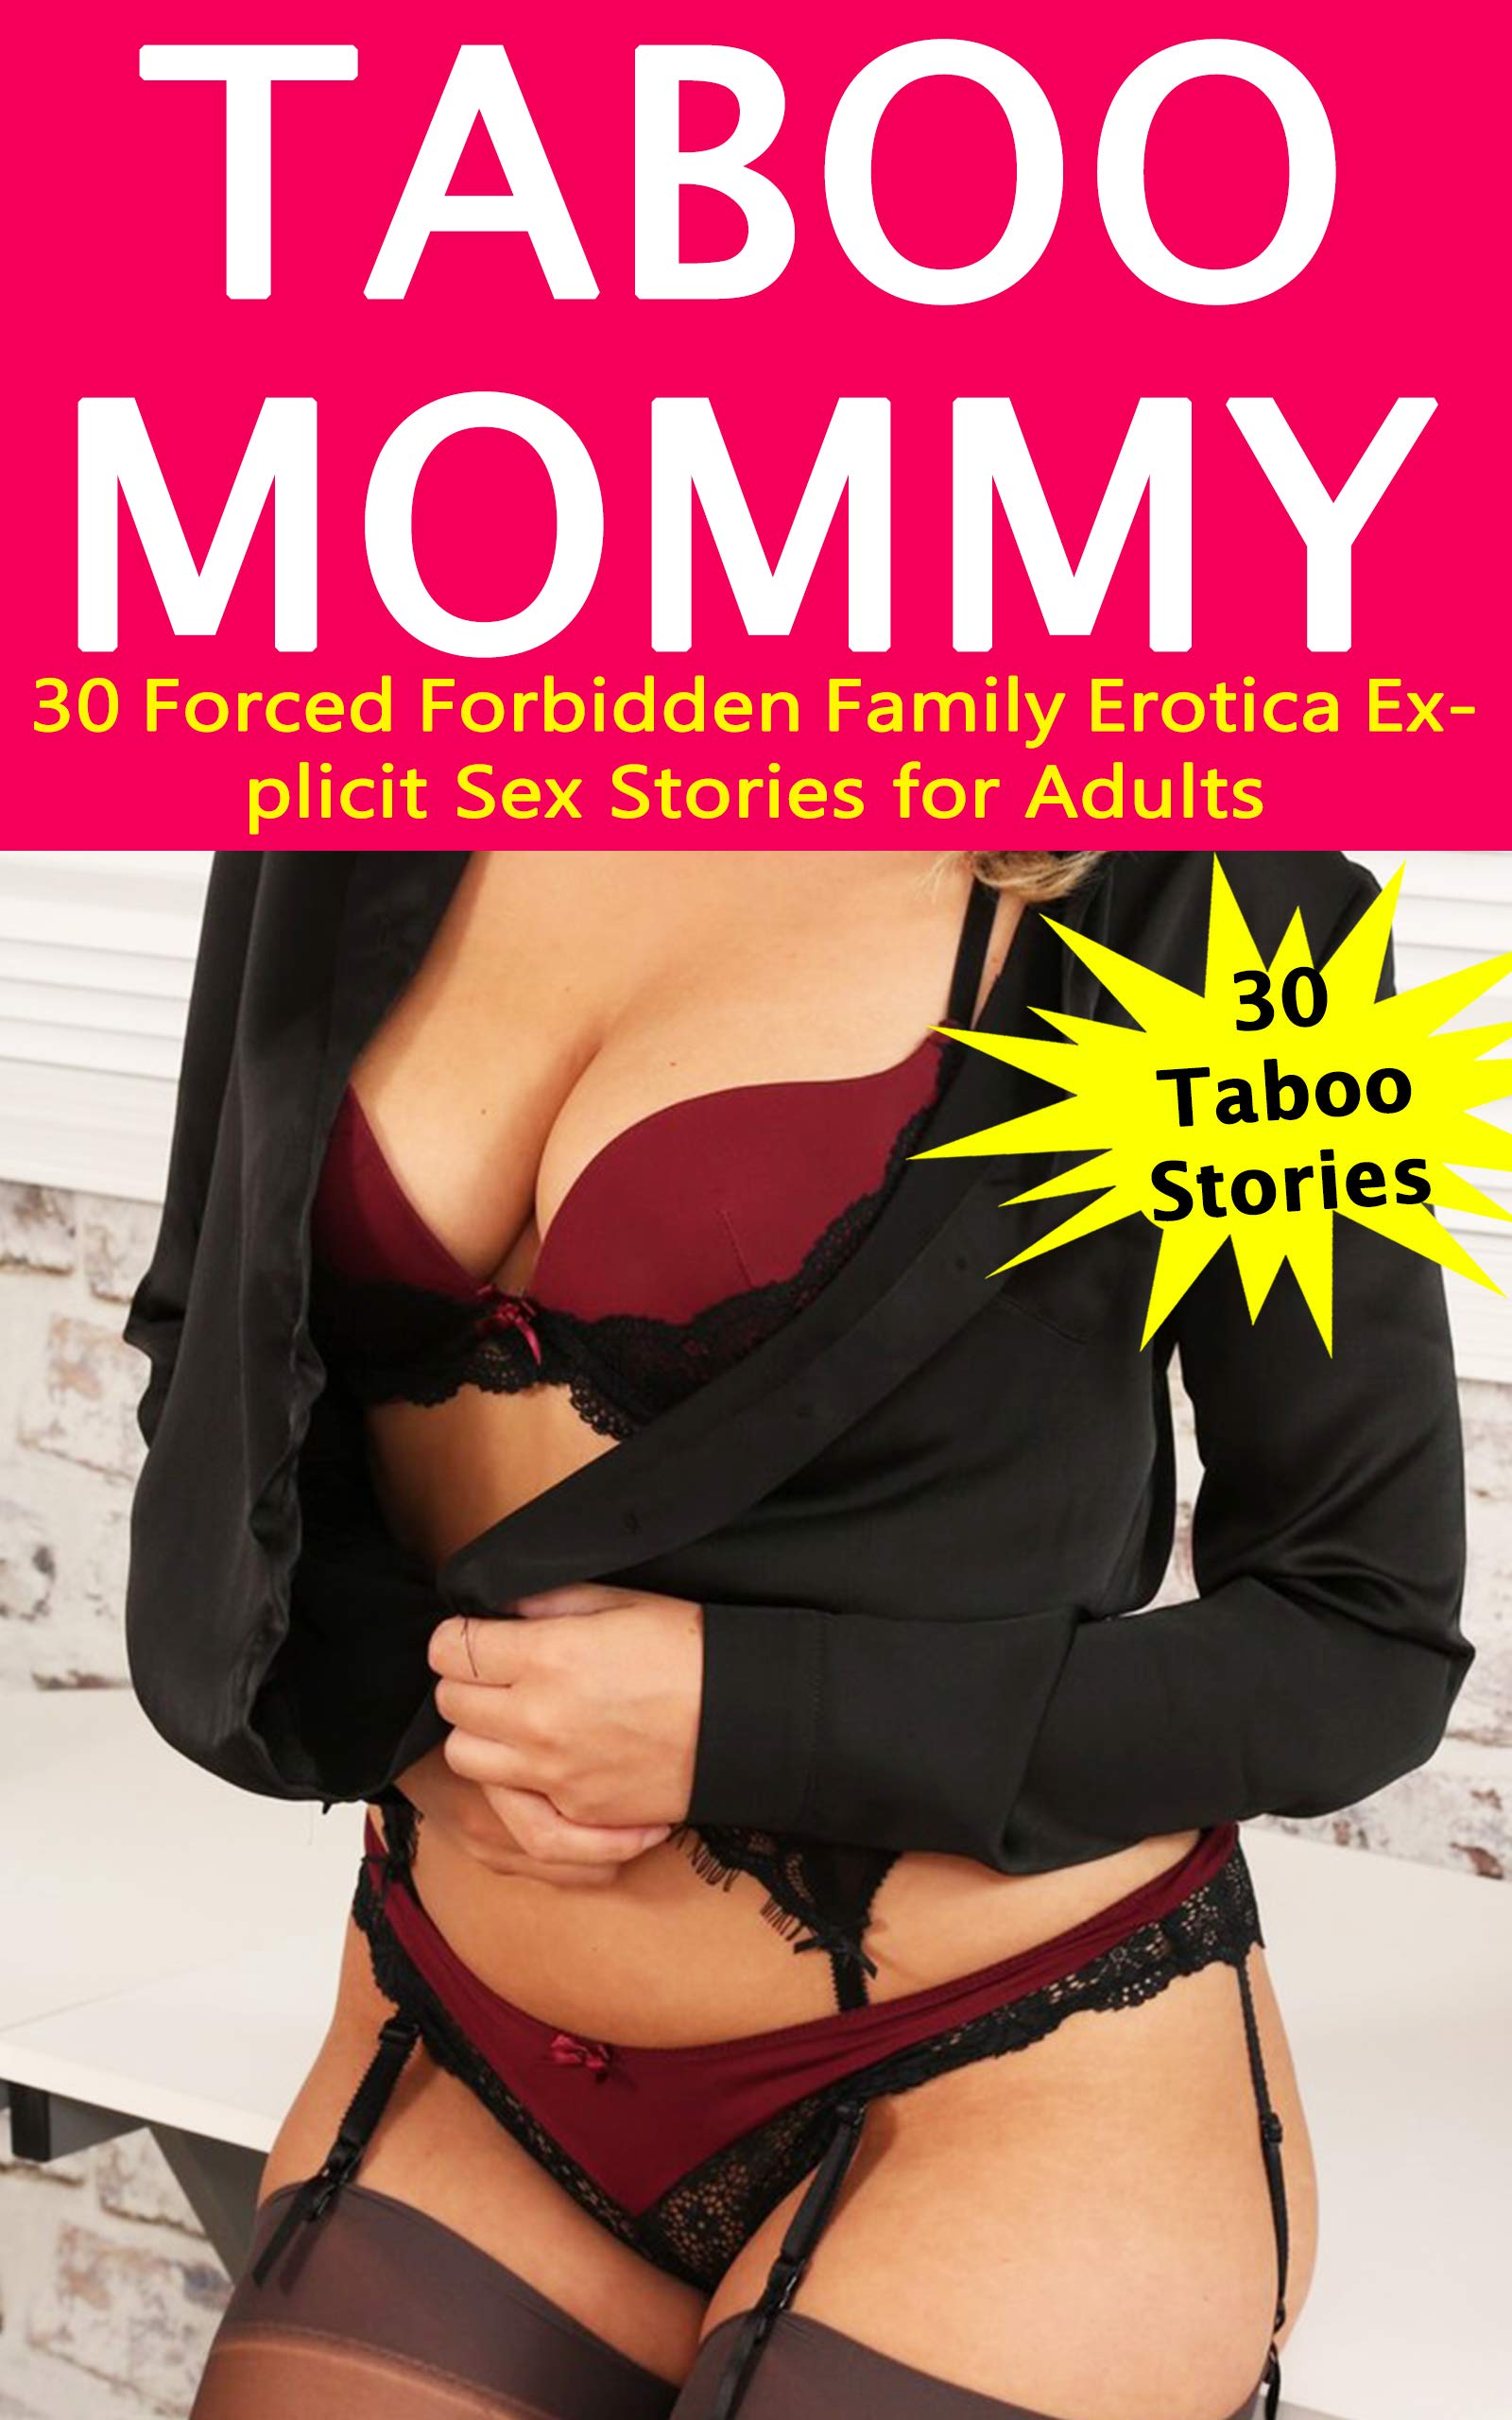 ashley smither add mom teaches sex stories photo